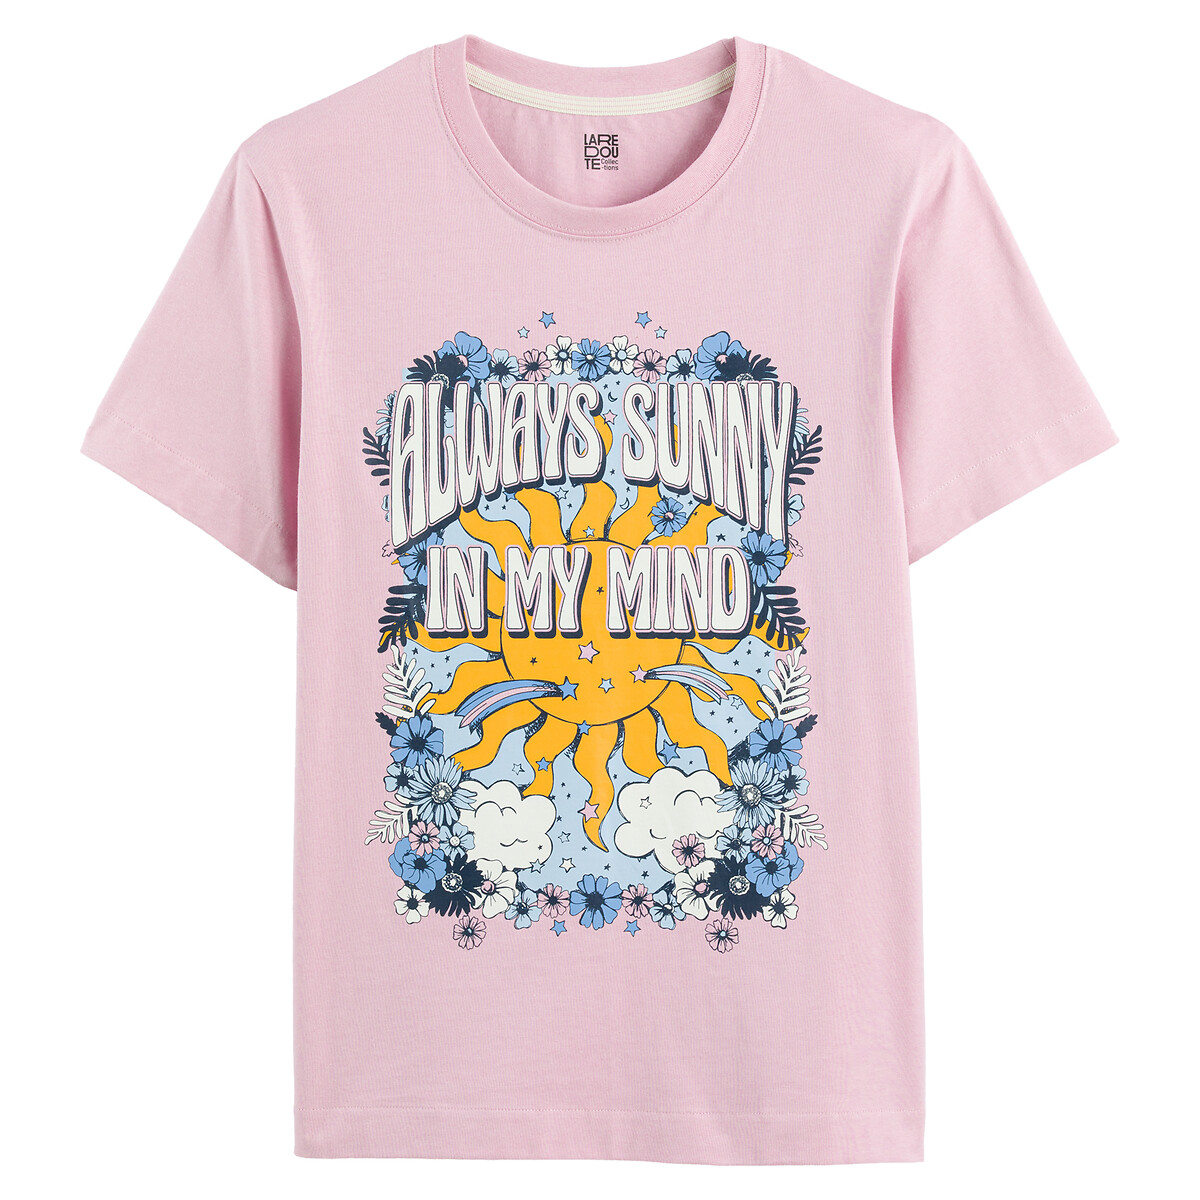 Cotton Slogan T-Shirt with Seventies-Inspired Print and Crew Neck